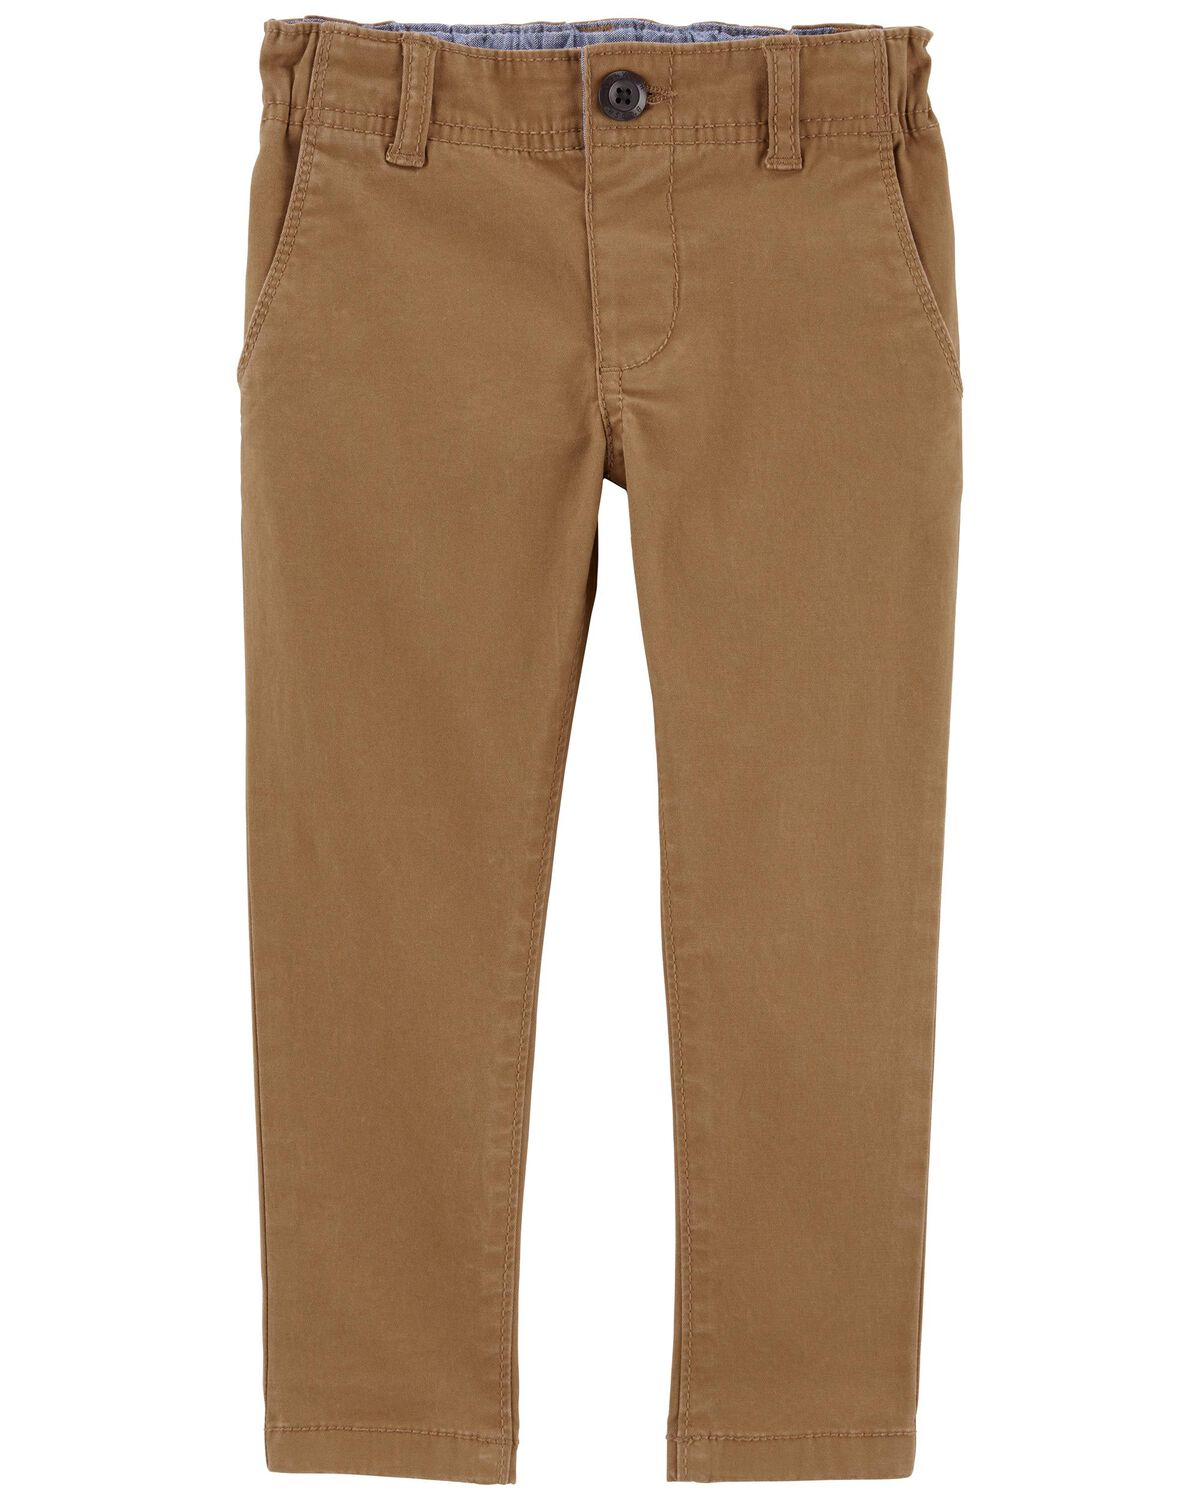 Cedar Baby Skinny Fit Tapered Chino Pants | carters.com